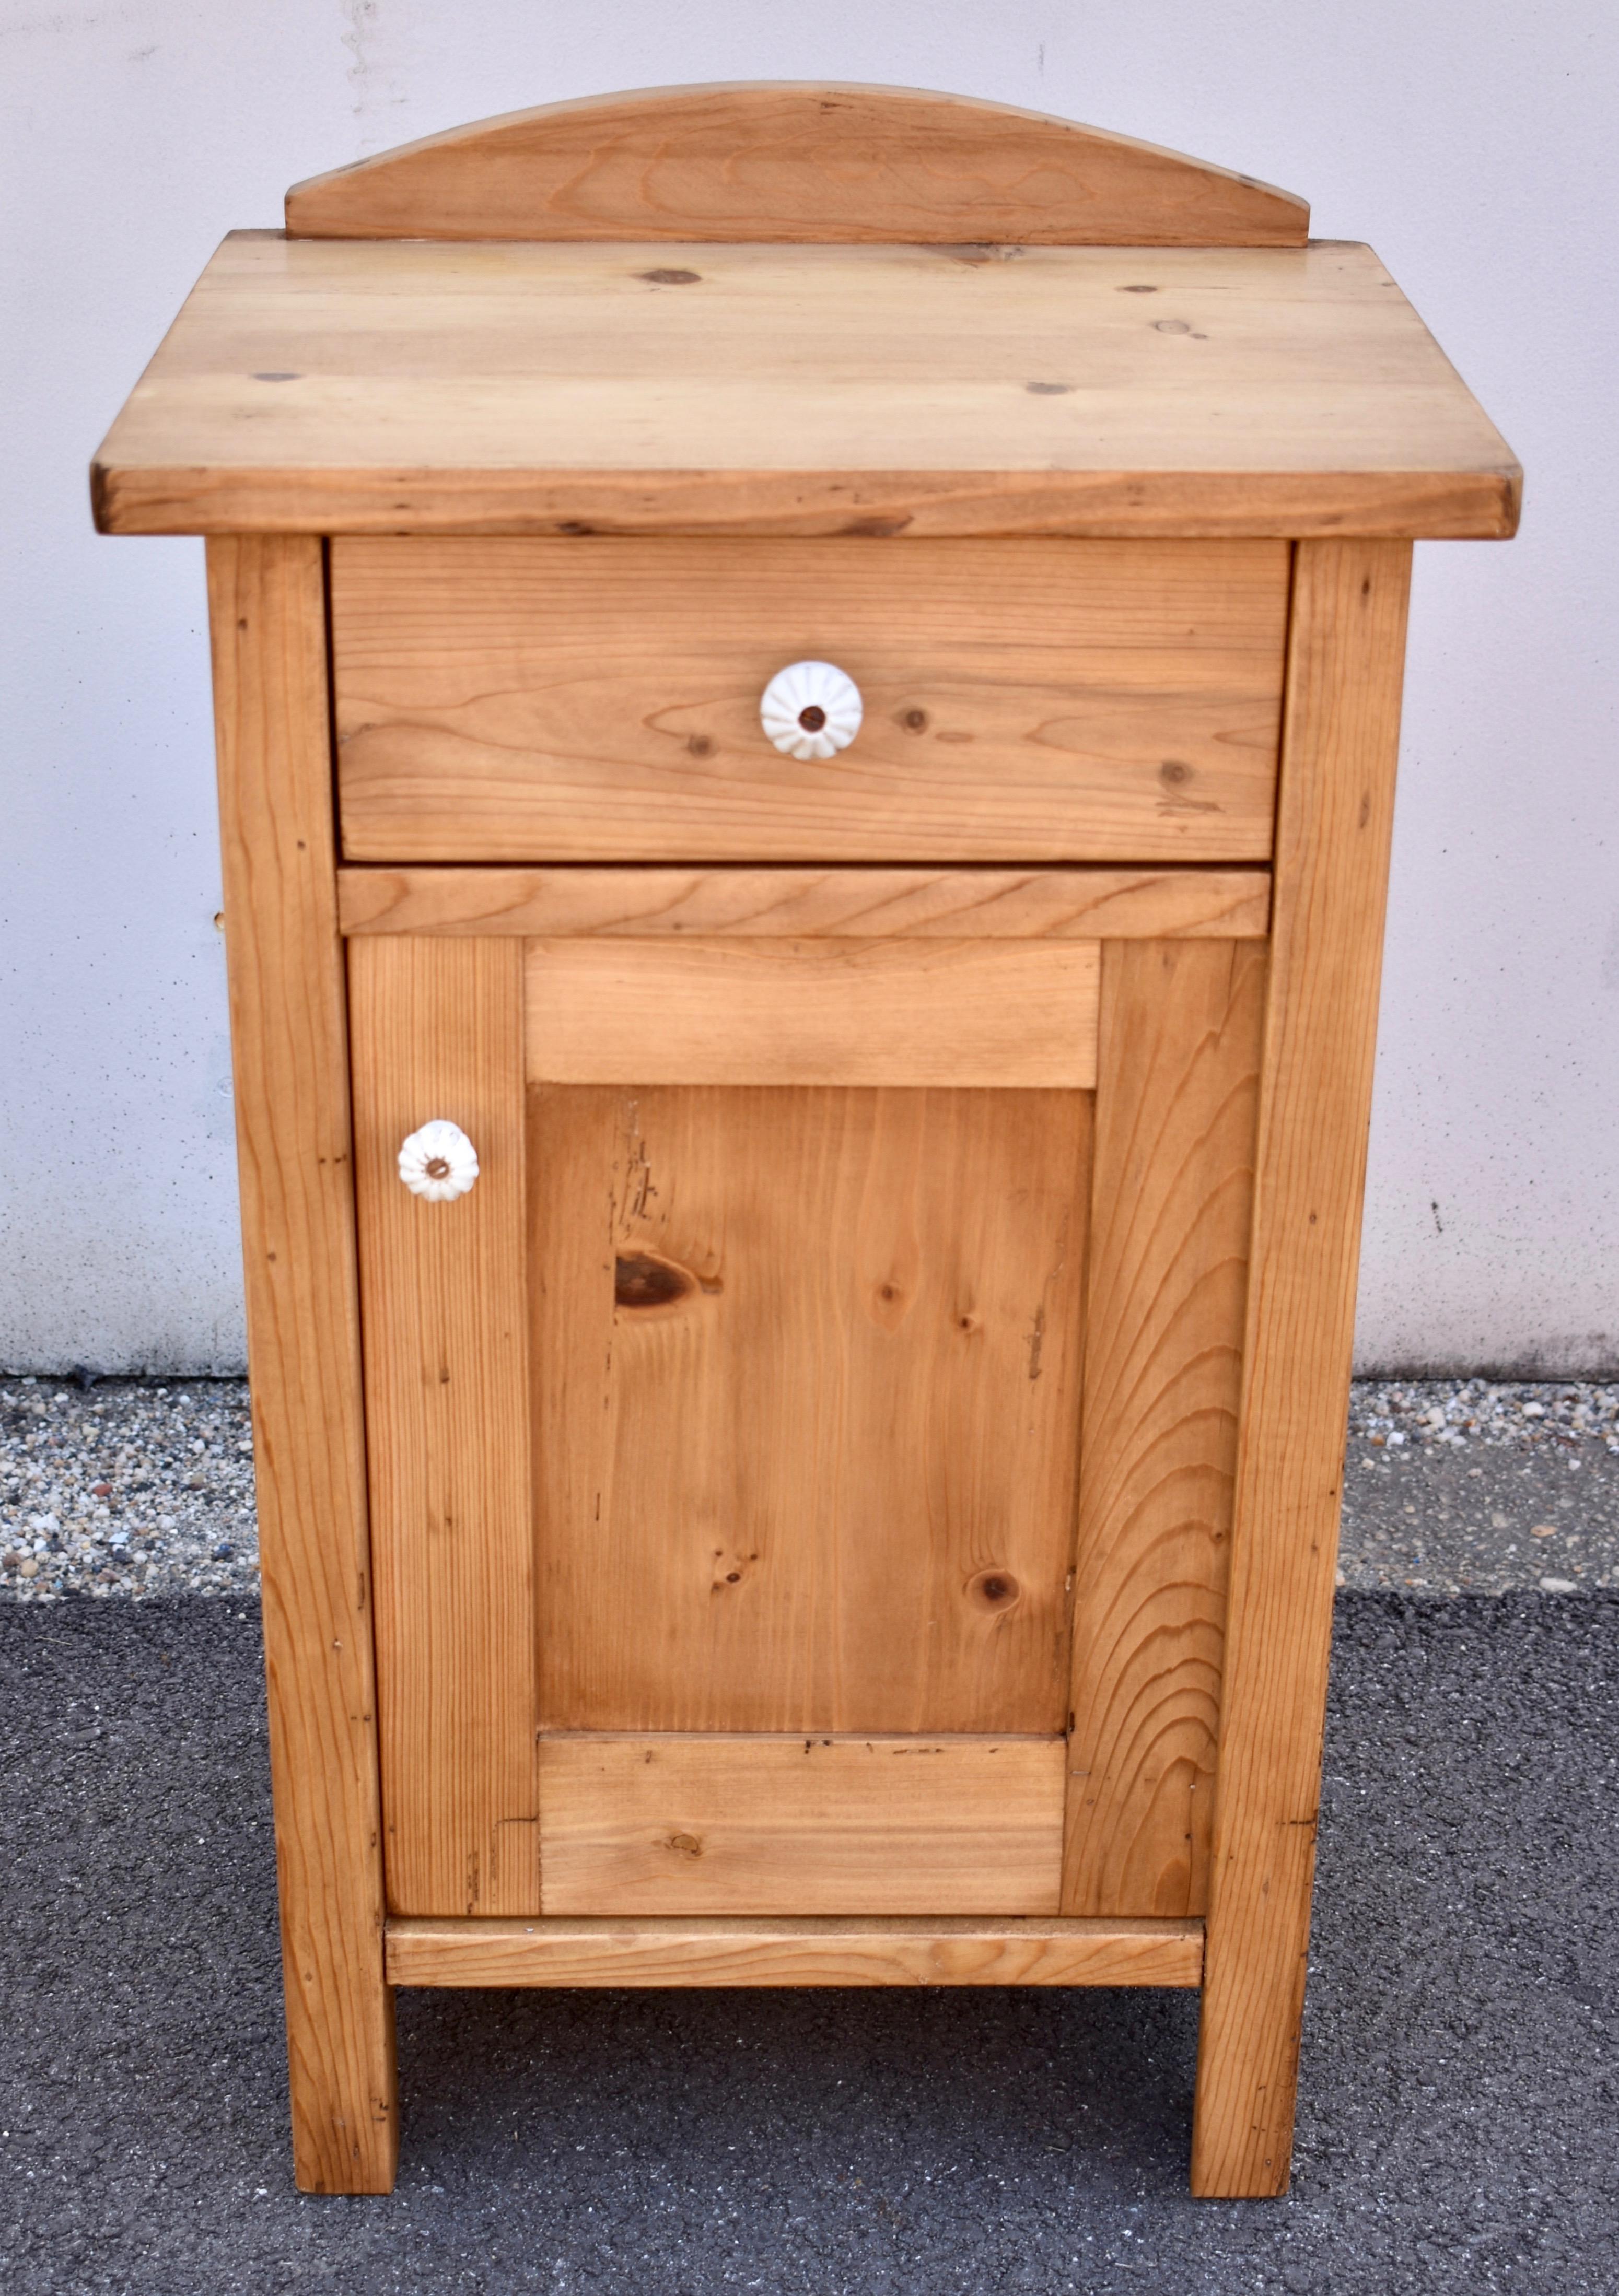 This is a particularly nice pair of pine nightstands, sturdy and “stocky” with clean straight lines and built of thick and heavy yellow pine.  The top is surmounted by a 3” high arched splashback, and the drawers are hand-made.  The plain side forms